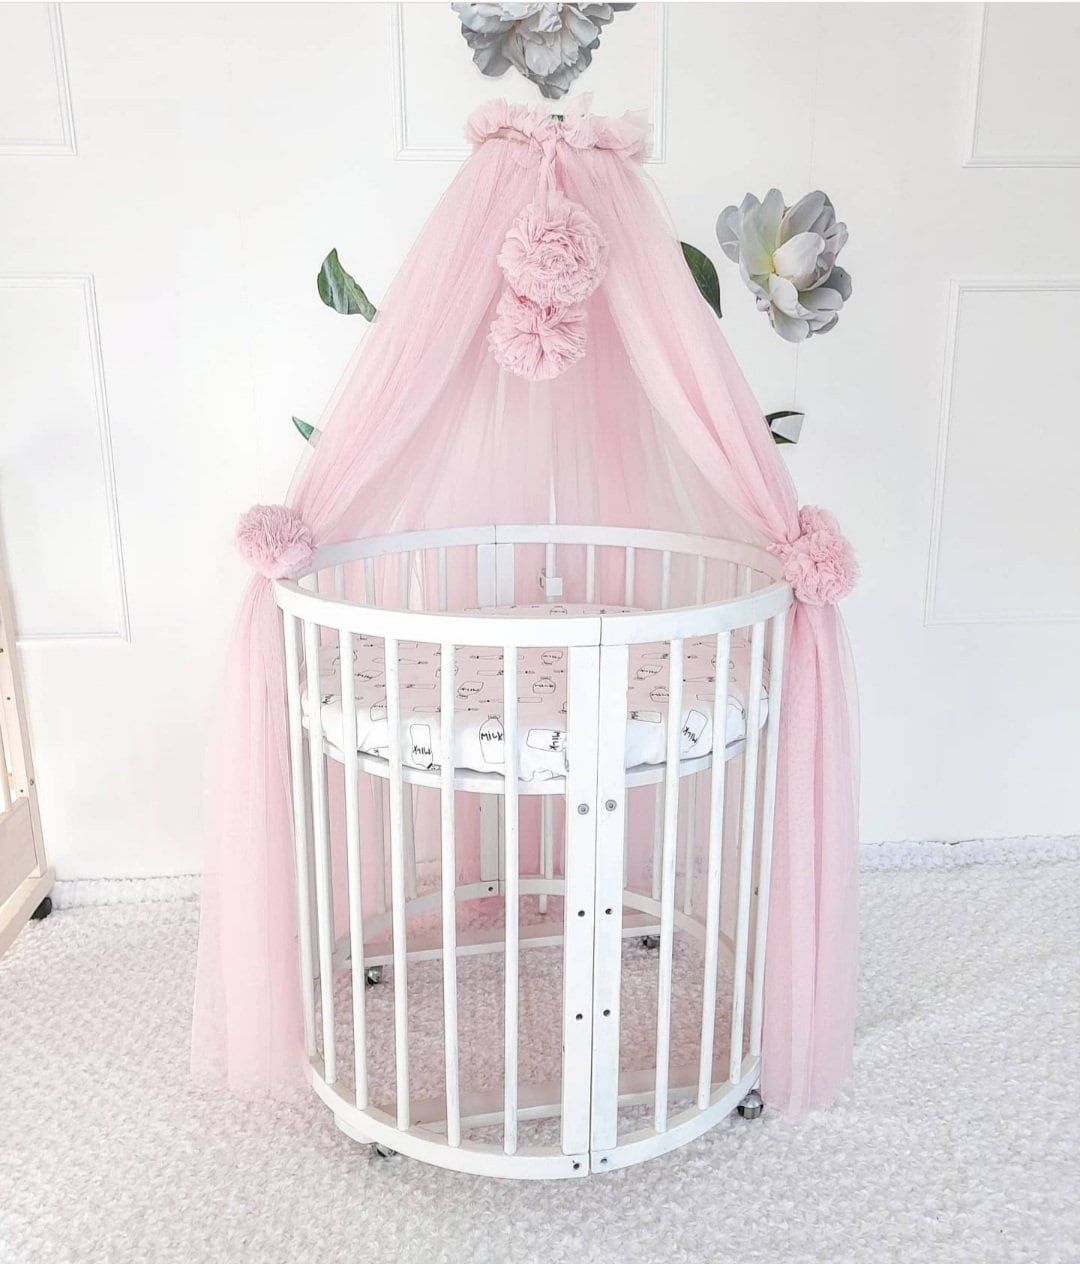 Canopy Bed tulle for nursery / Kids hanging tent for bedroom / Princess playhouse / Pom Pom canopy +Swan pillow as a gift